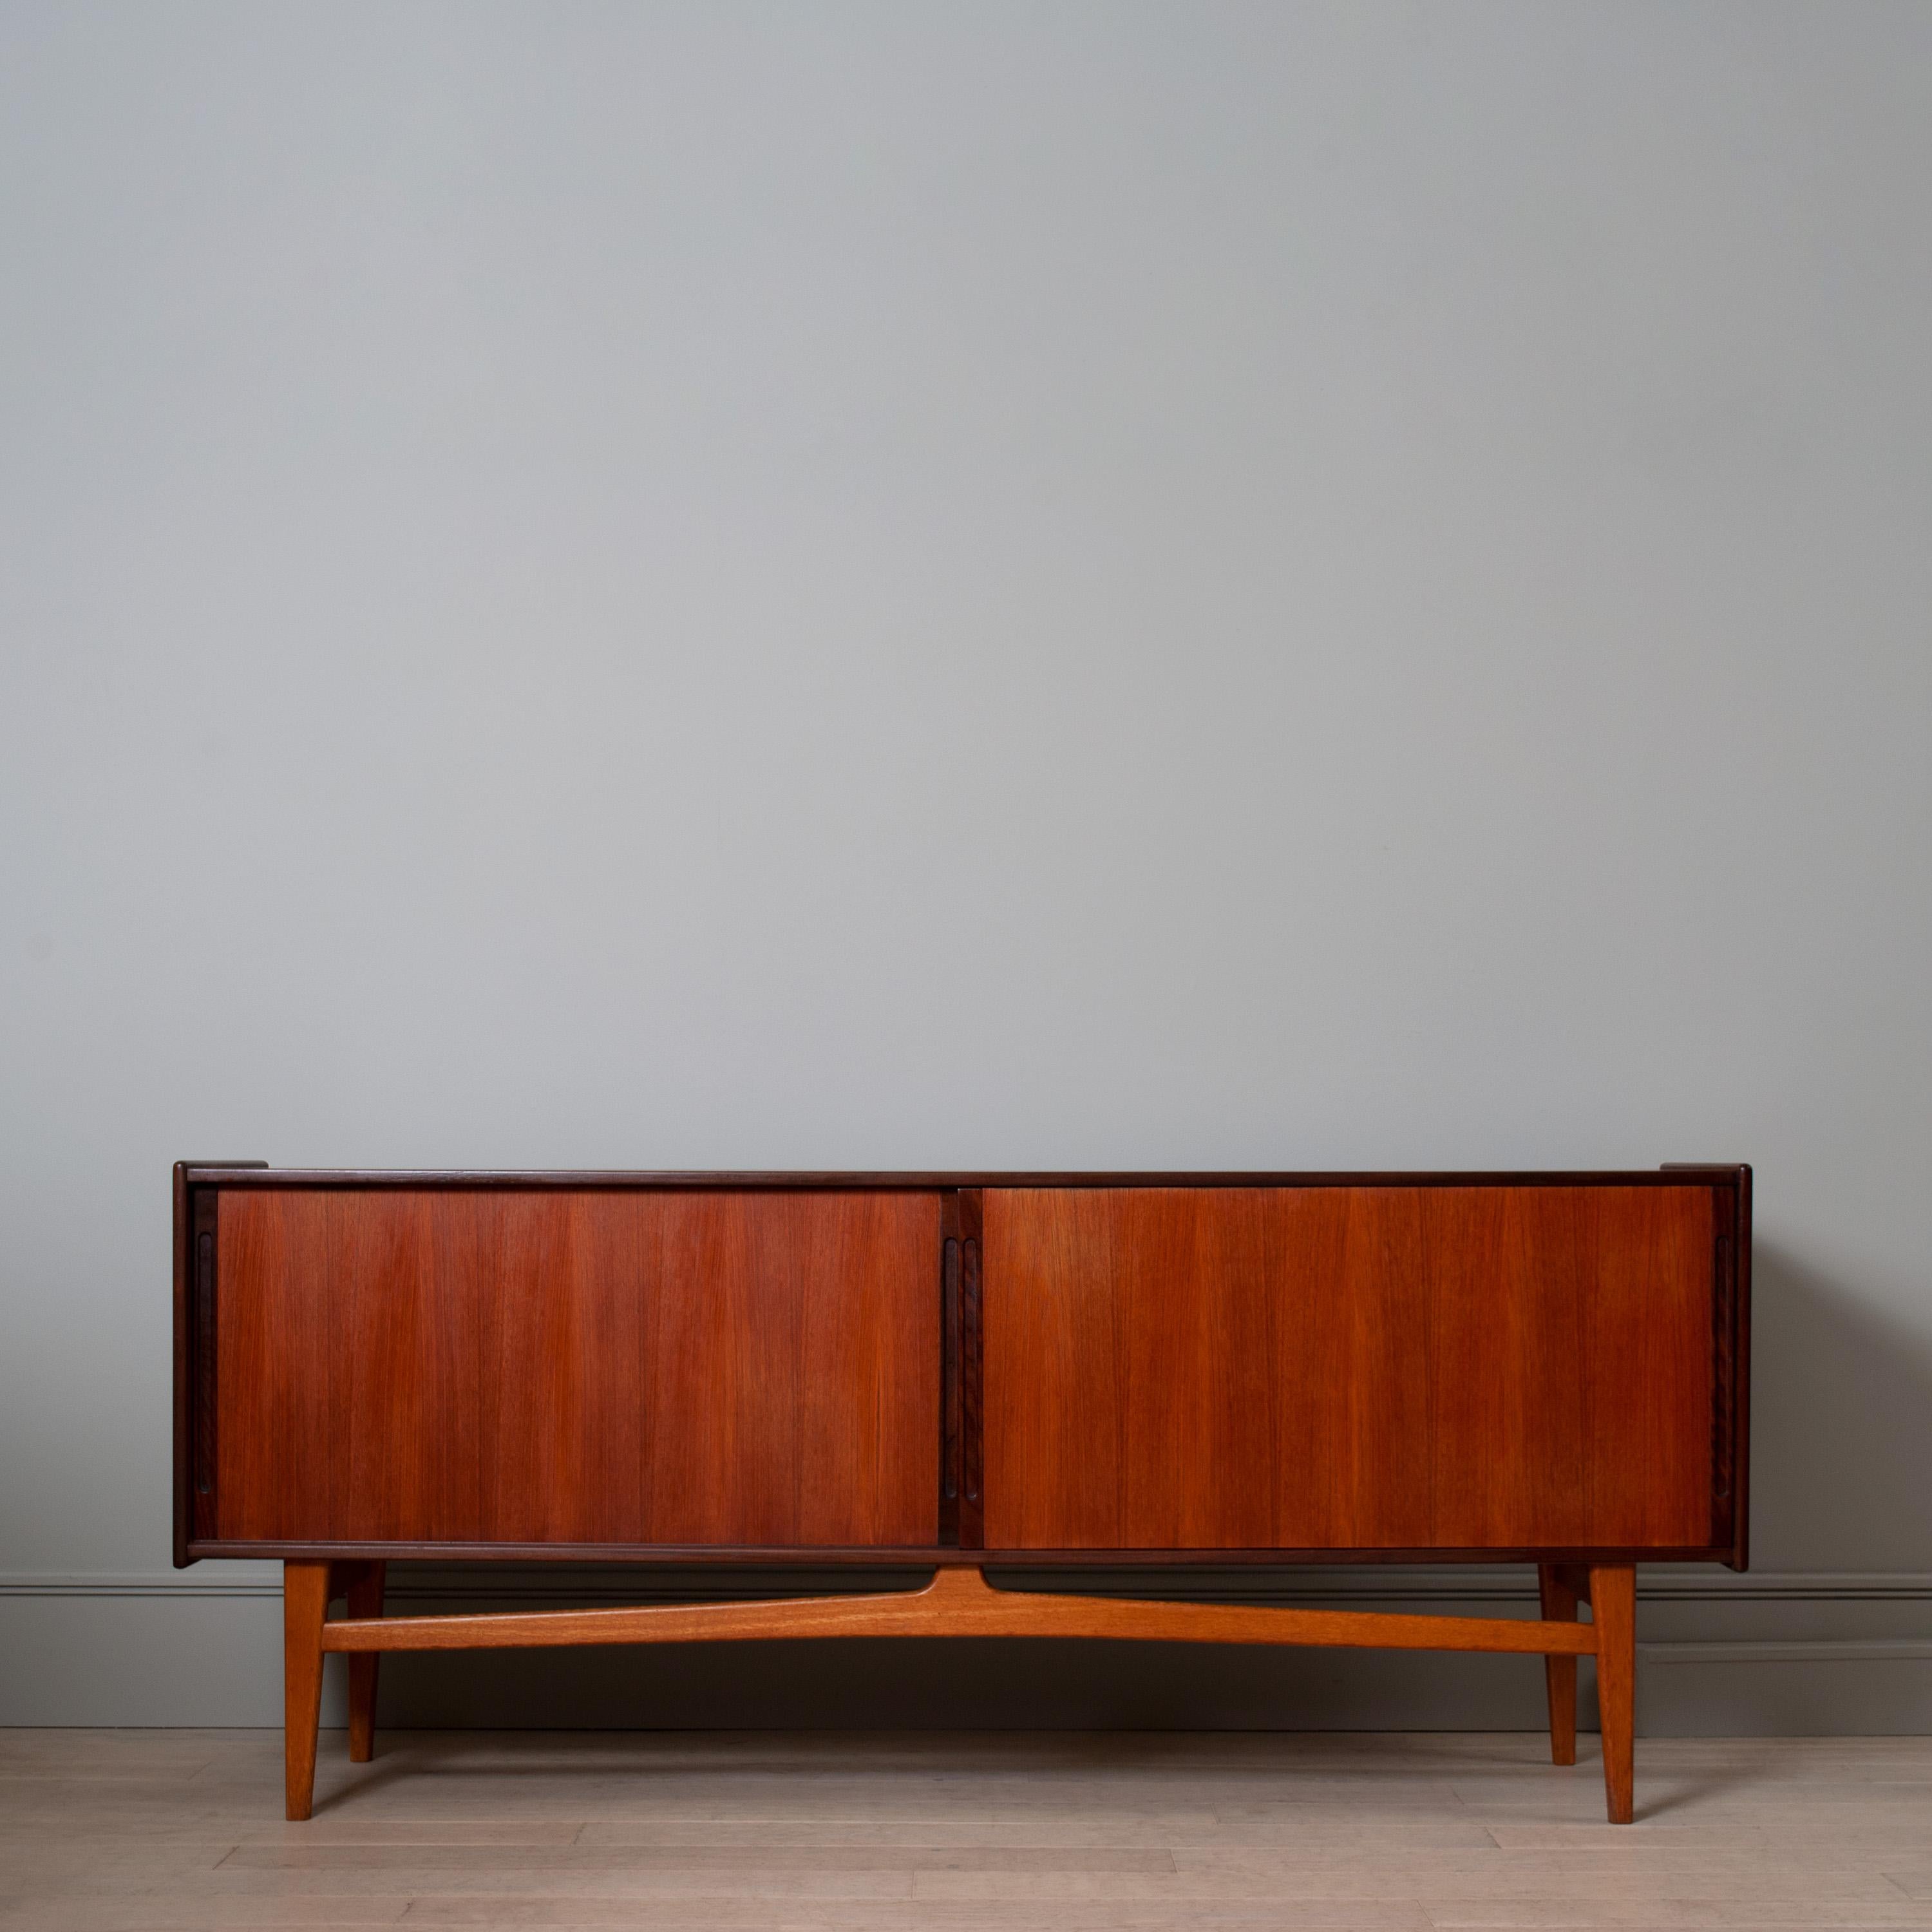 A large Scandinavian modernist sideboard - credenza made with teak and contrasting oak legs and stretcher base. The left side has an adjustable internal shelf and the right 2 drawers and a single shelf. 
Produced in Denmark circa 1960.